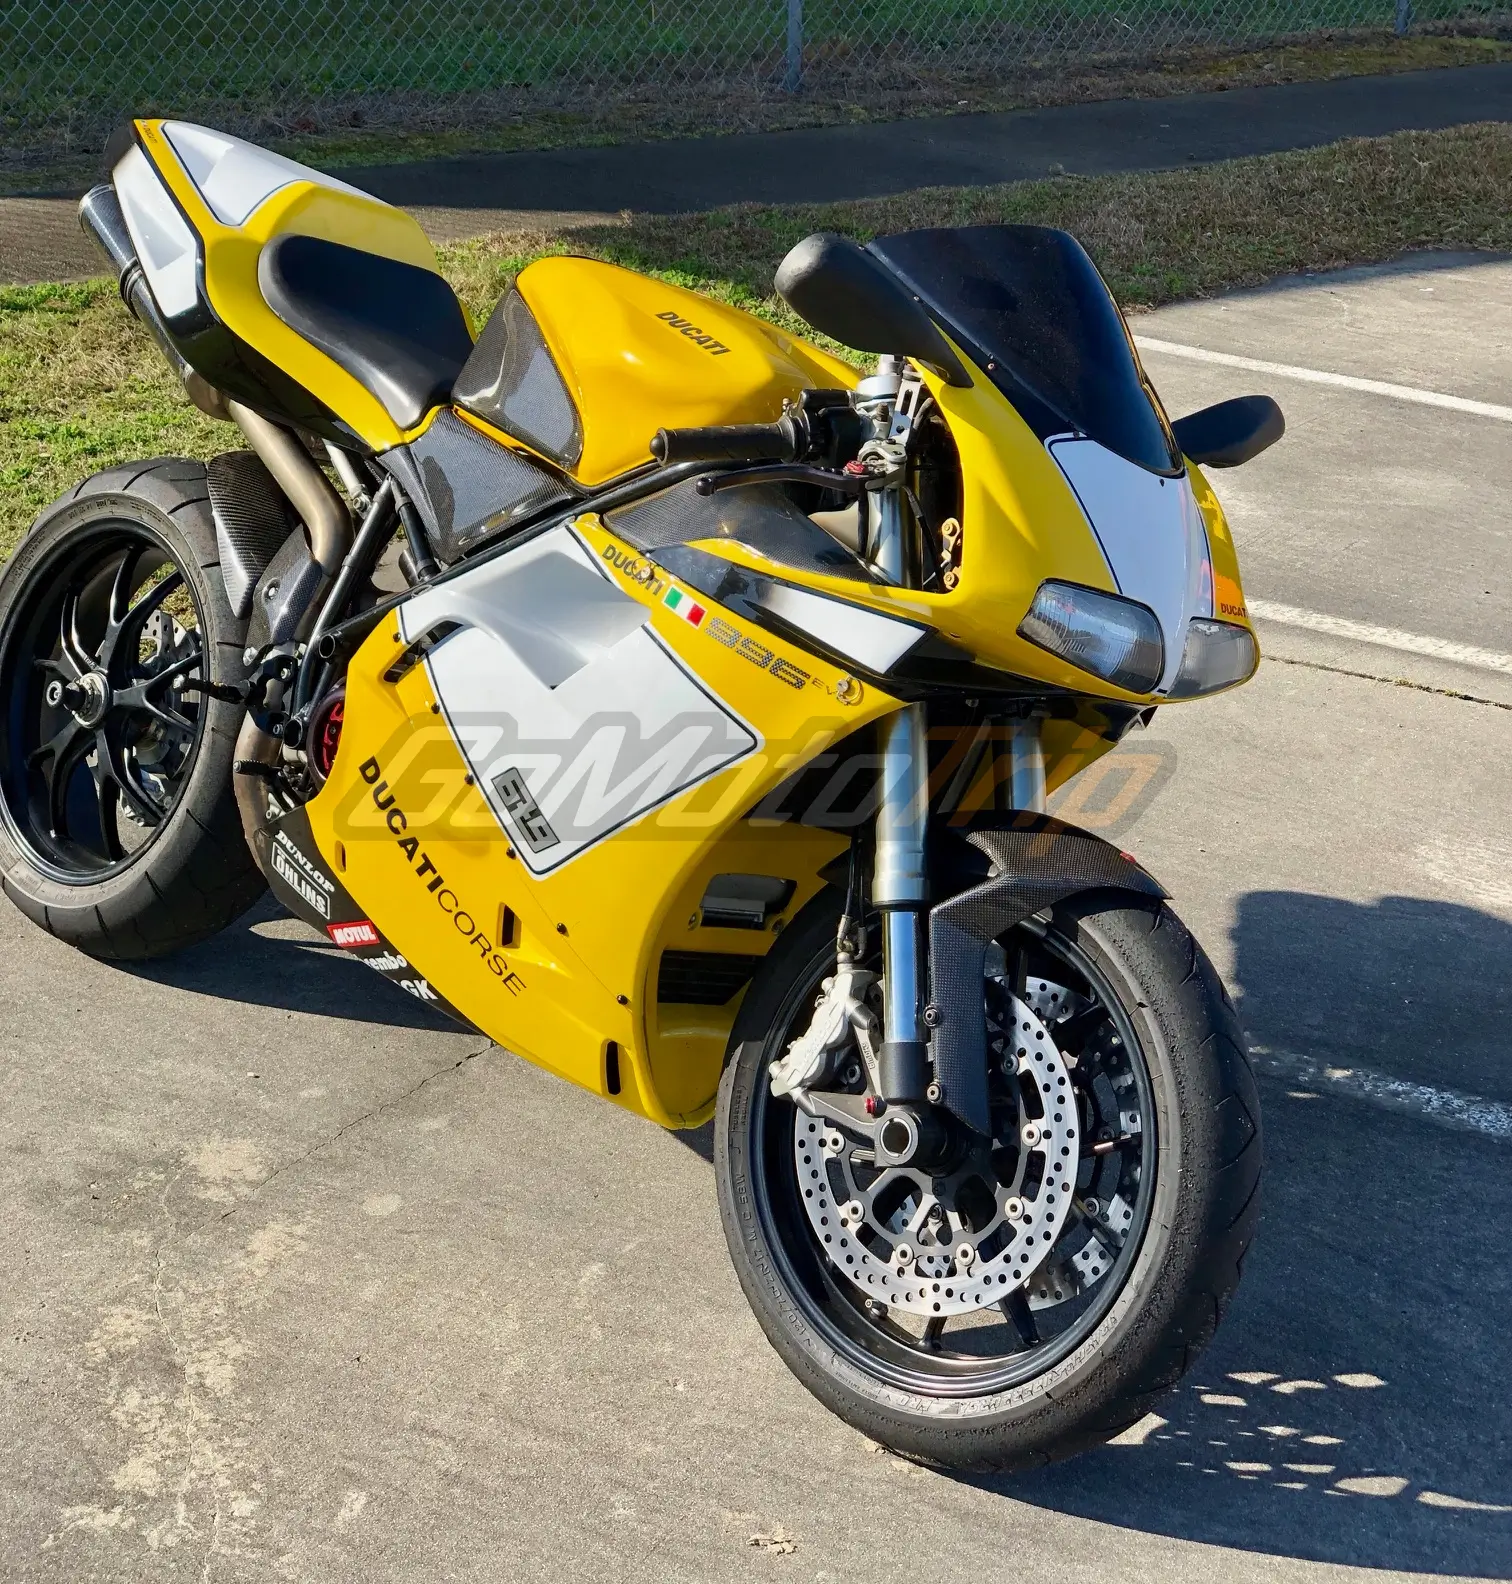 Rider-Review-Dustin-Ducati-996-Yellow-Special-Fairing-2